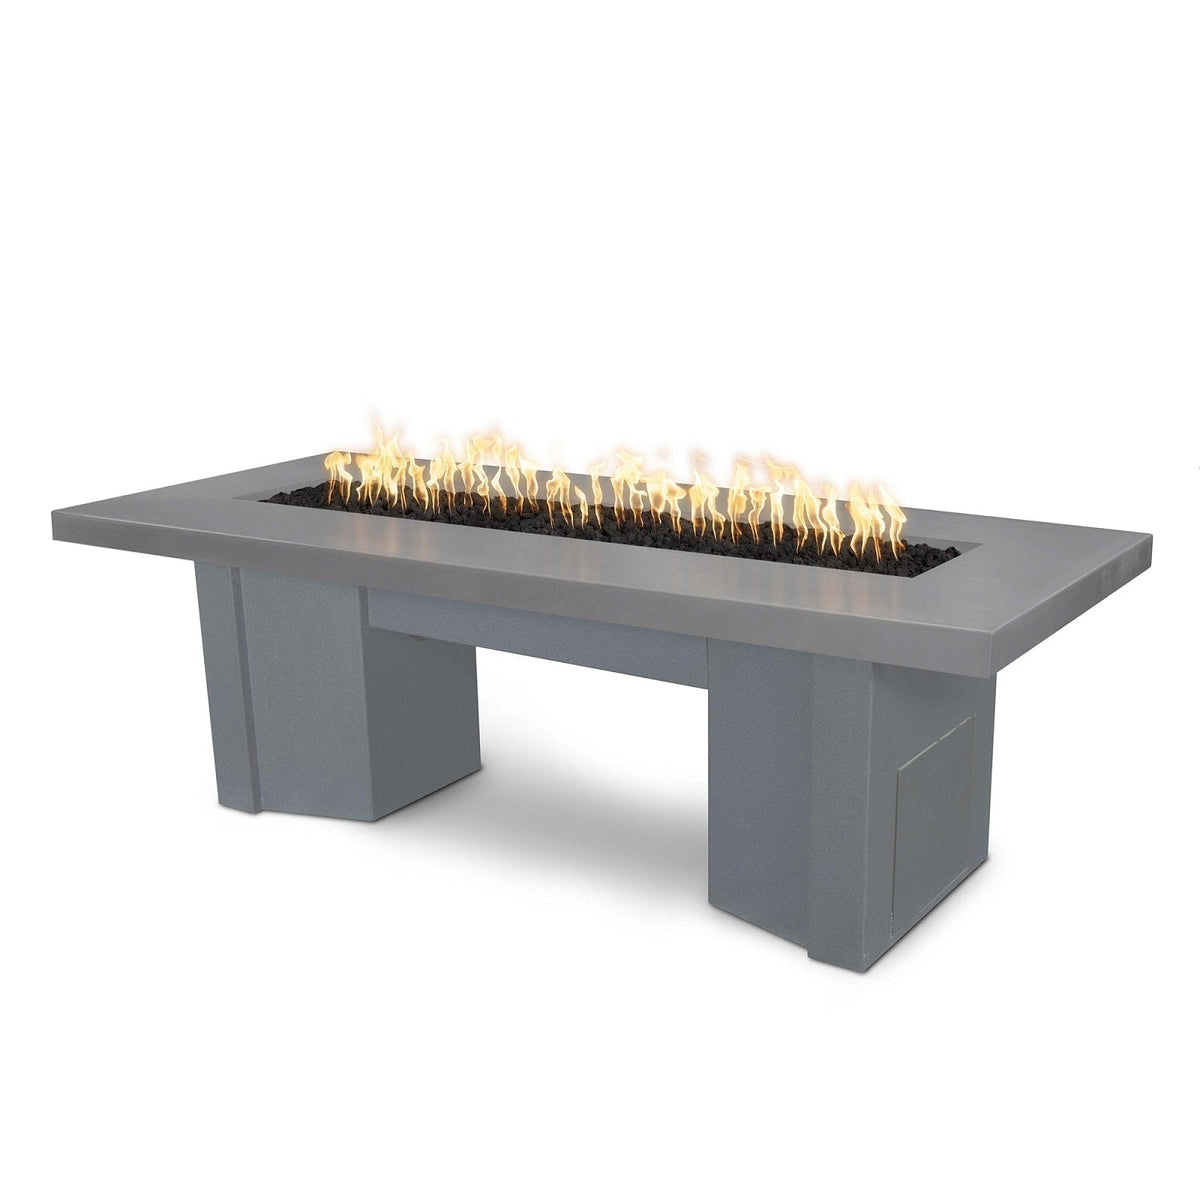 The Outdoor Plus Fire Features Natural Gray (-NGY) / Gray Powder Coated Steel (-GRY) The Outdoor Plus 60&quot; Alameda Fire Table Smooth Concrete in Liquid Propane - 12V Electronic Ignition / OPT-ALMGFRC60E12V-LP